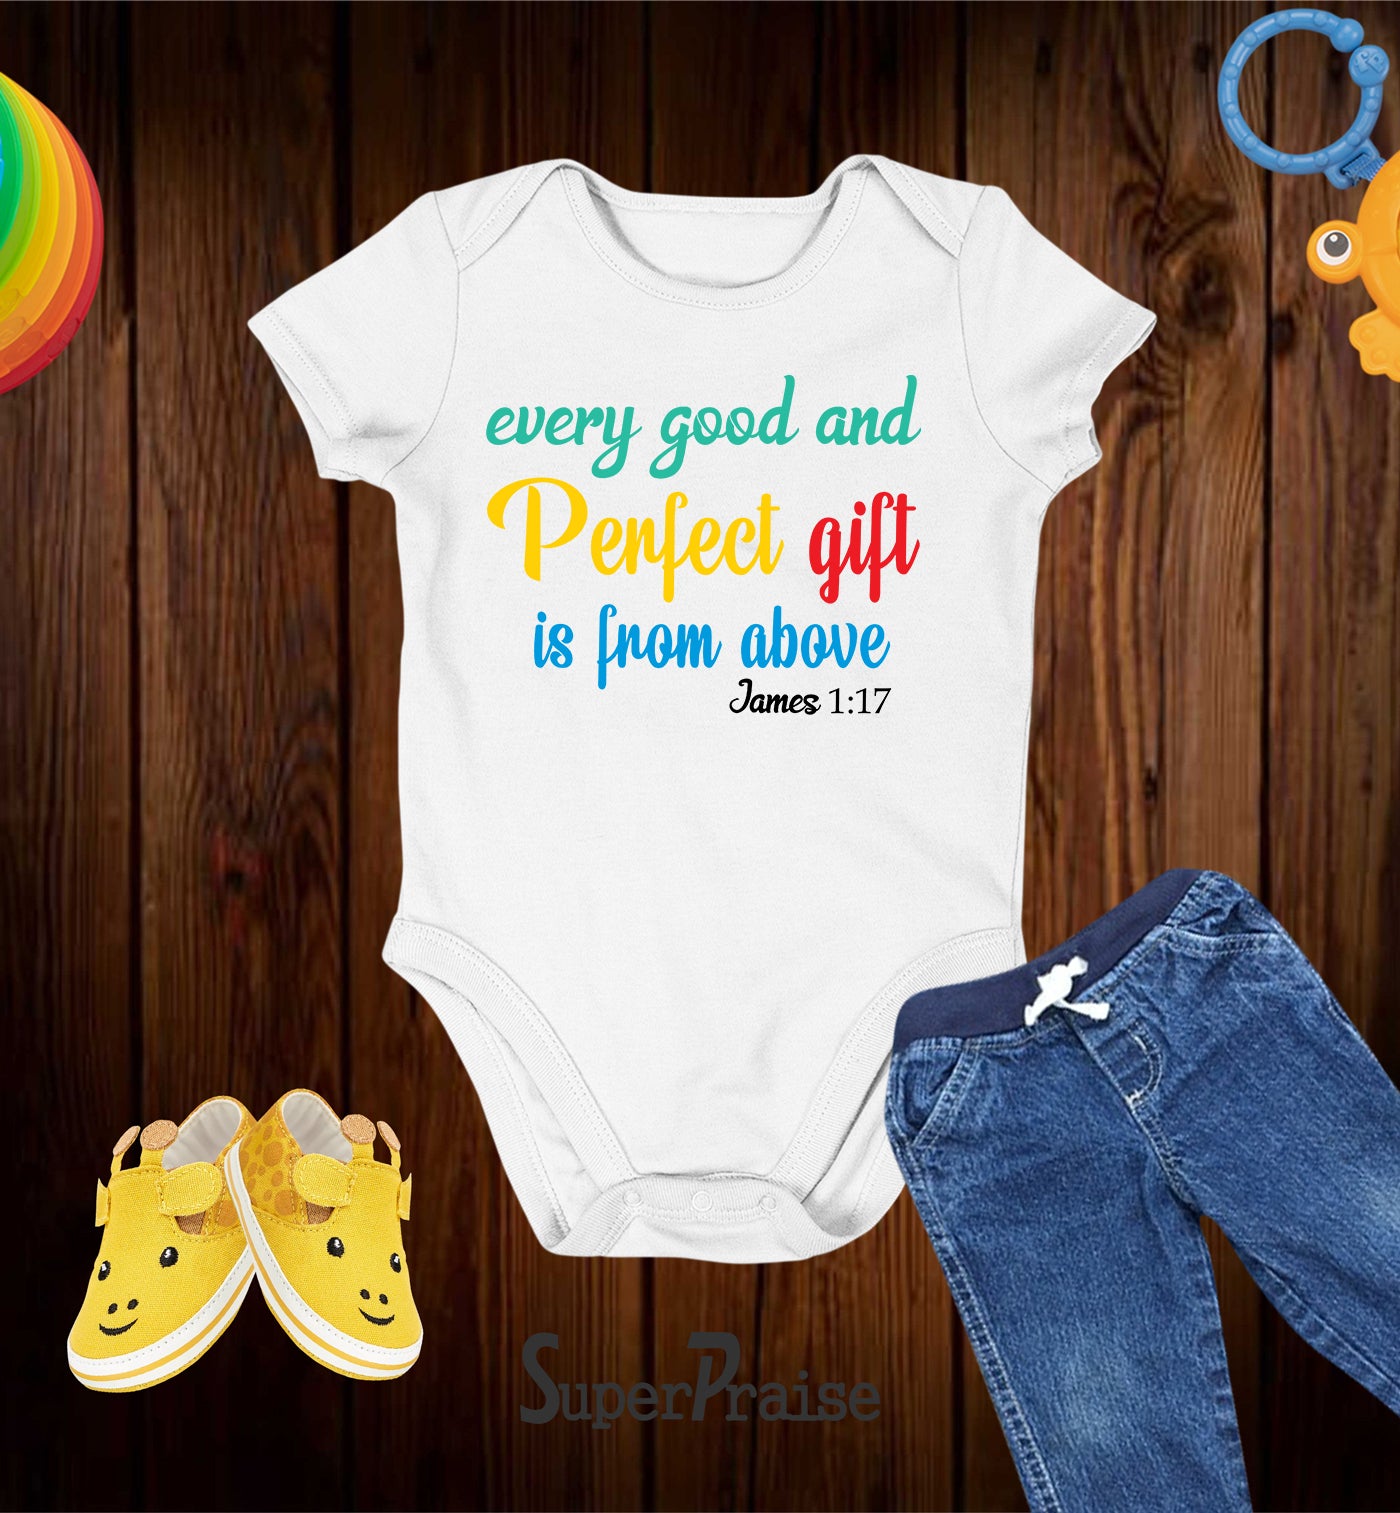 Every Good And Perfect Gift Is From Above James 1:17 Baby Bodysuit